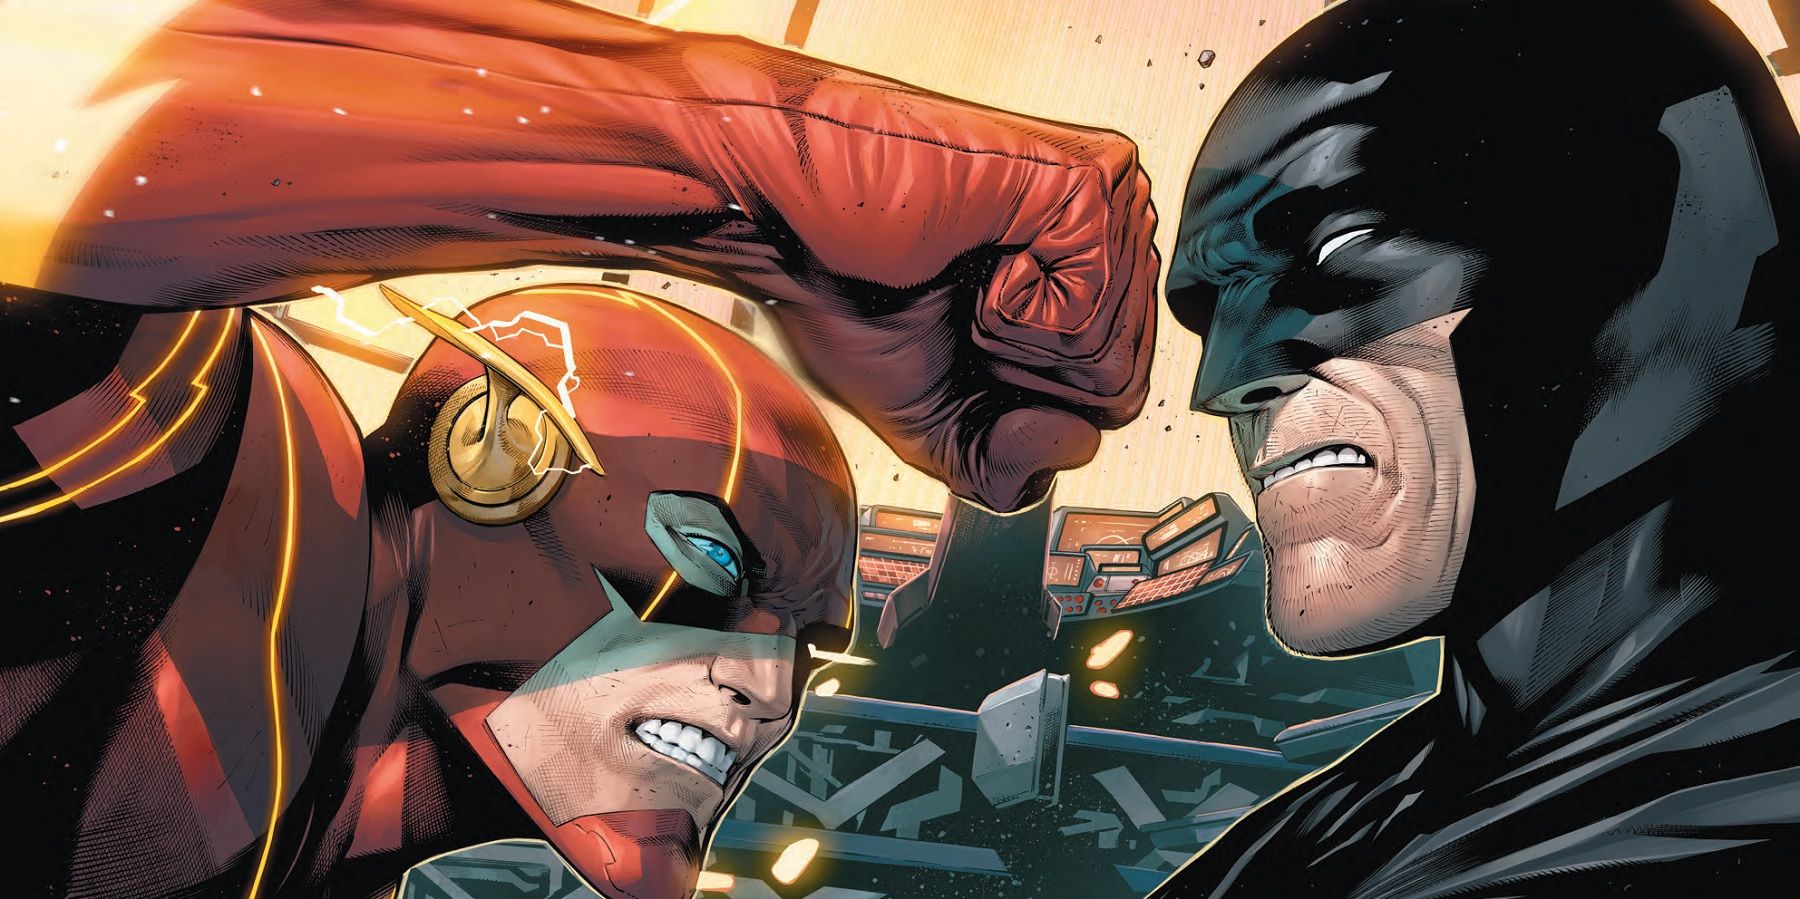 Batman May Have Just Cost Himself the Flash's Friendship